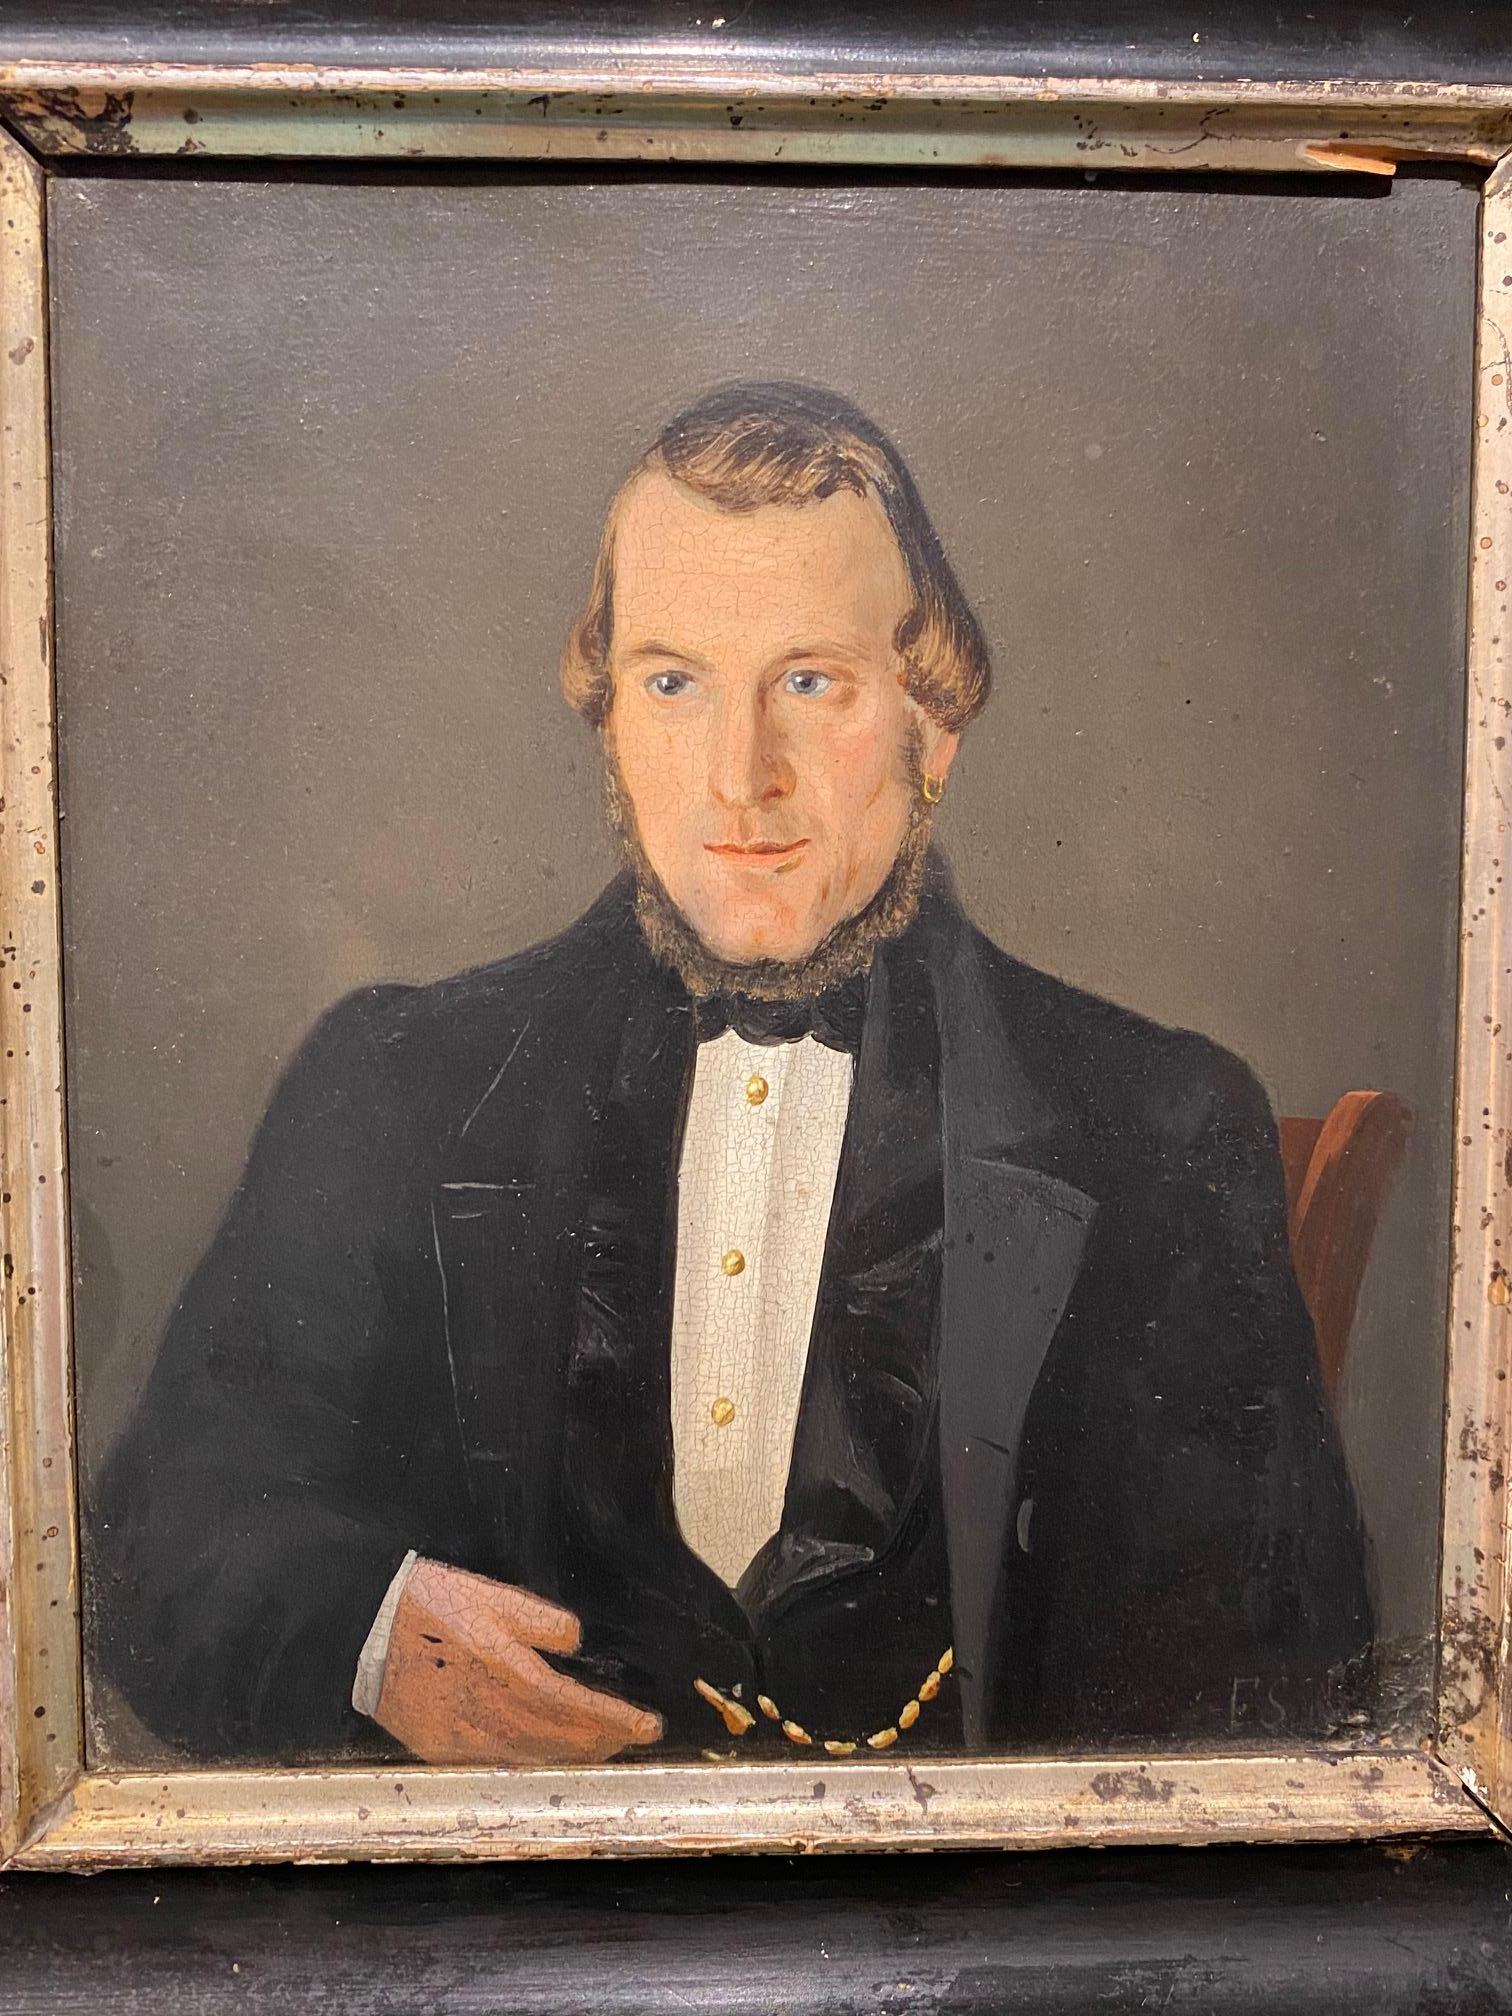 18th Century Portrait of a Whaling Captain, an oil on wooden panel half length portrait of a roguish sea captain with a gold earring - indicating almost certainly a whaling captain, and by the age of the painting most likely from Nantucket - signed